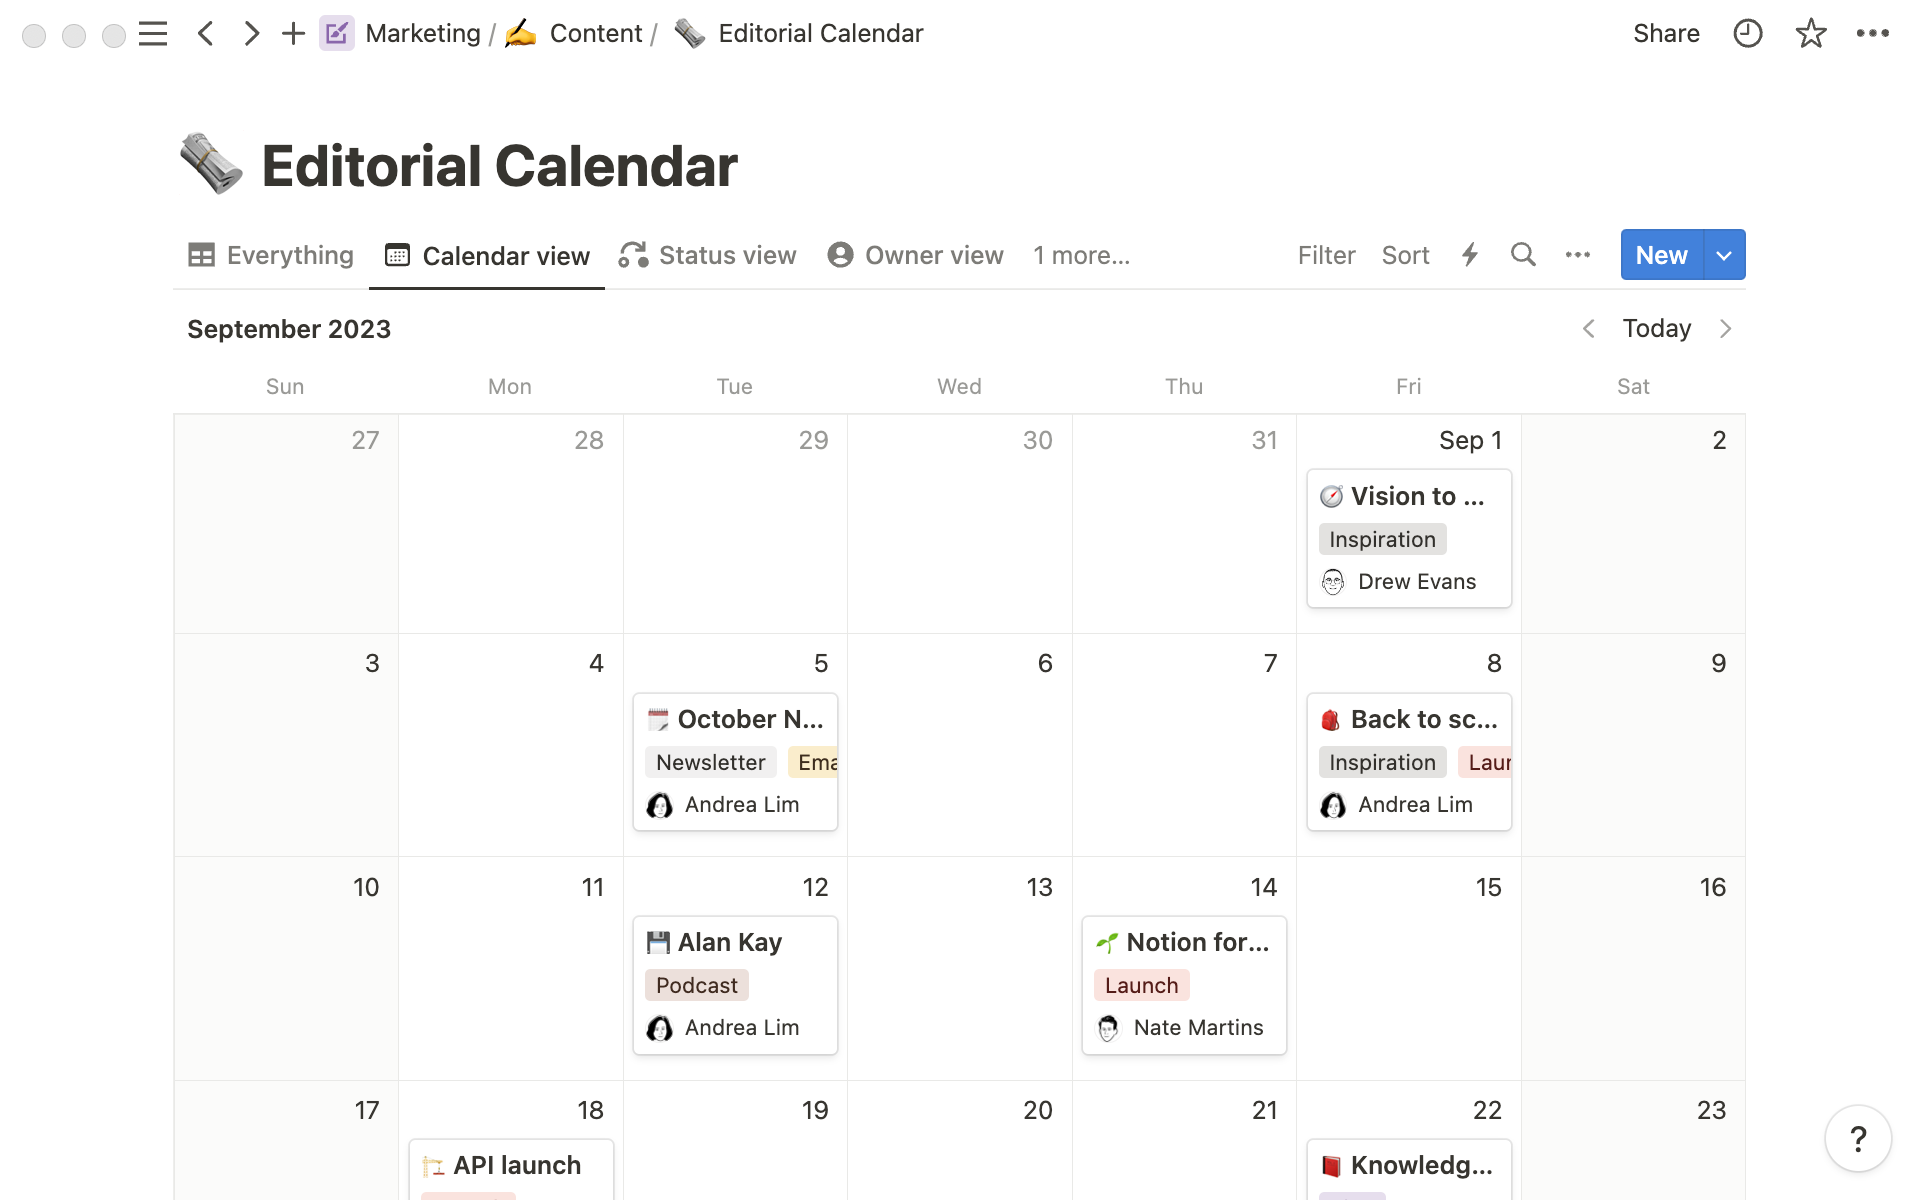 Our editorial calendar showing what content is coming up and when.